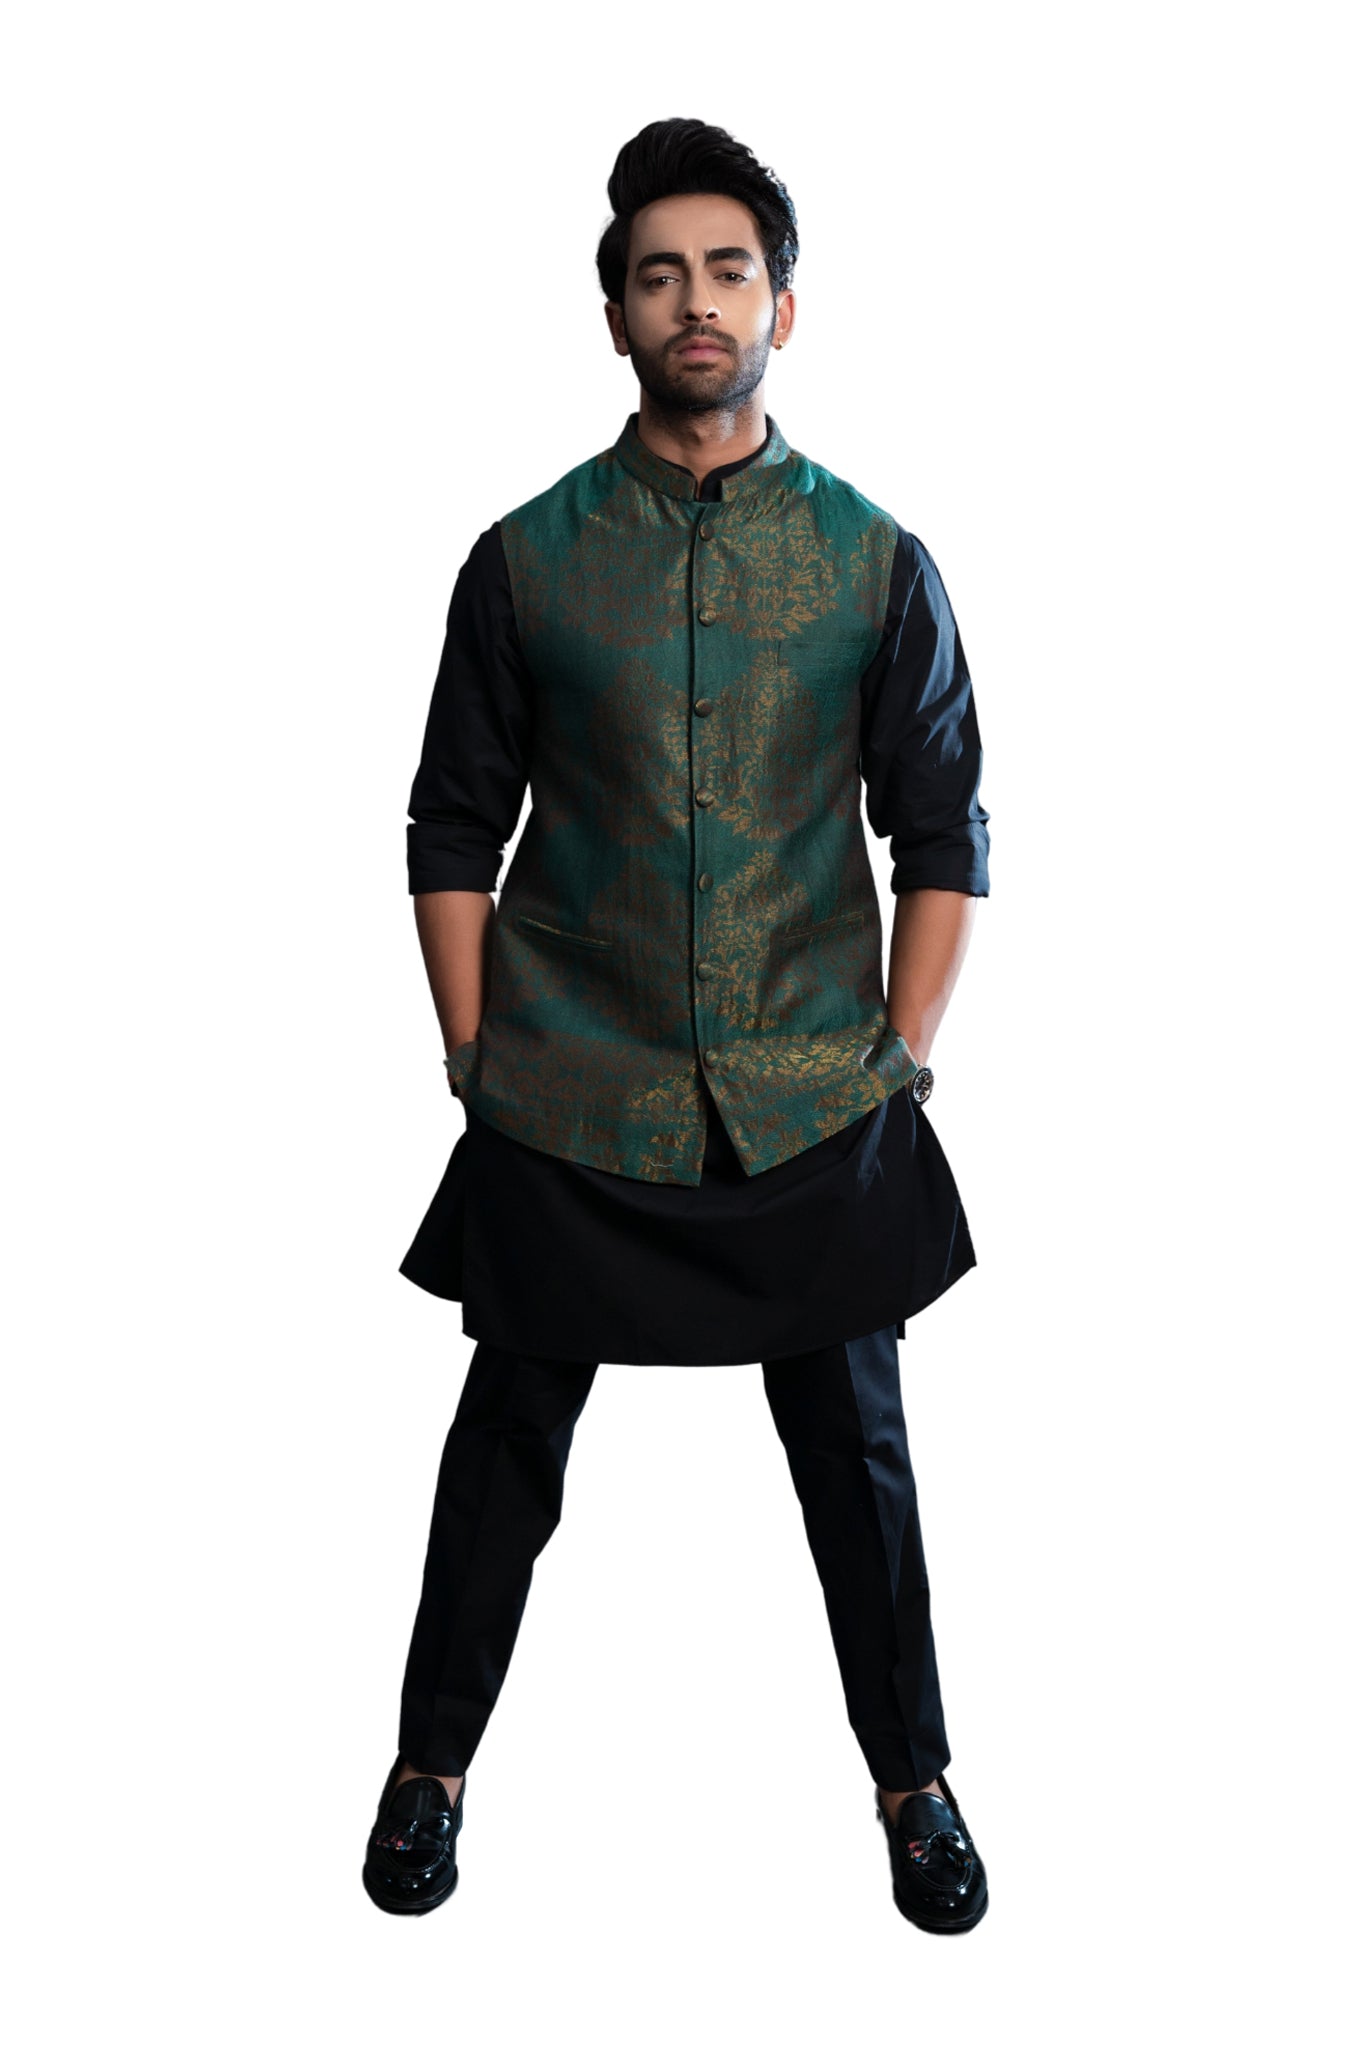 Top 9 Navratri Outfit Ideas for Men